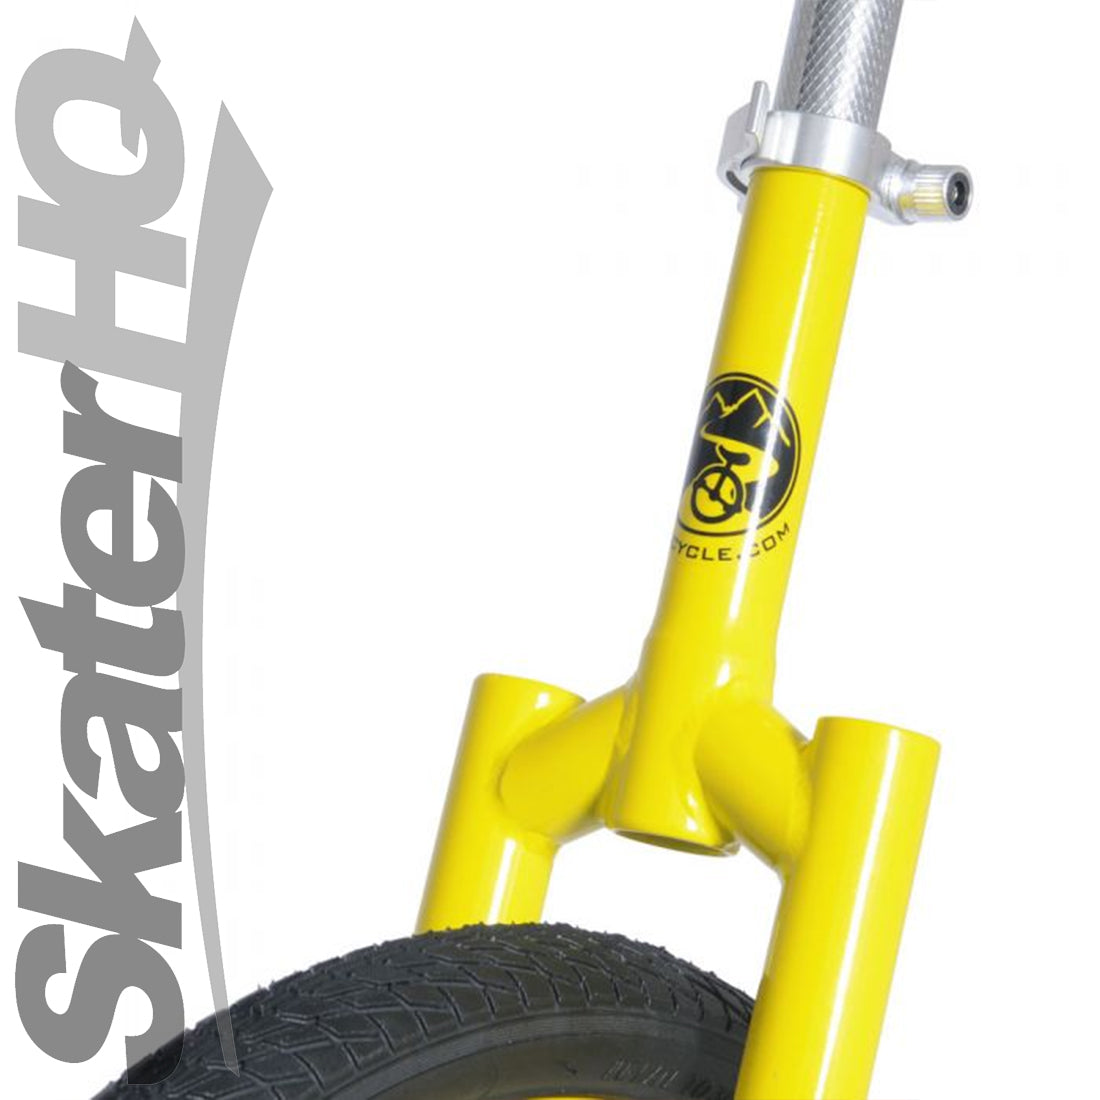 Leaf 20inch Unicycle - Yellow Other Fun Toys